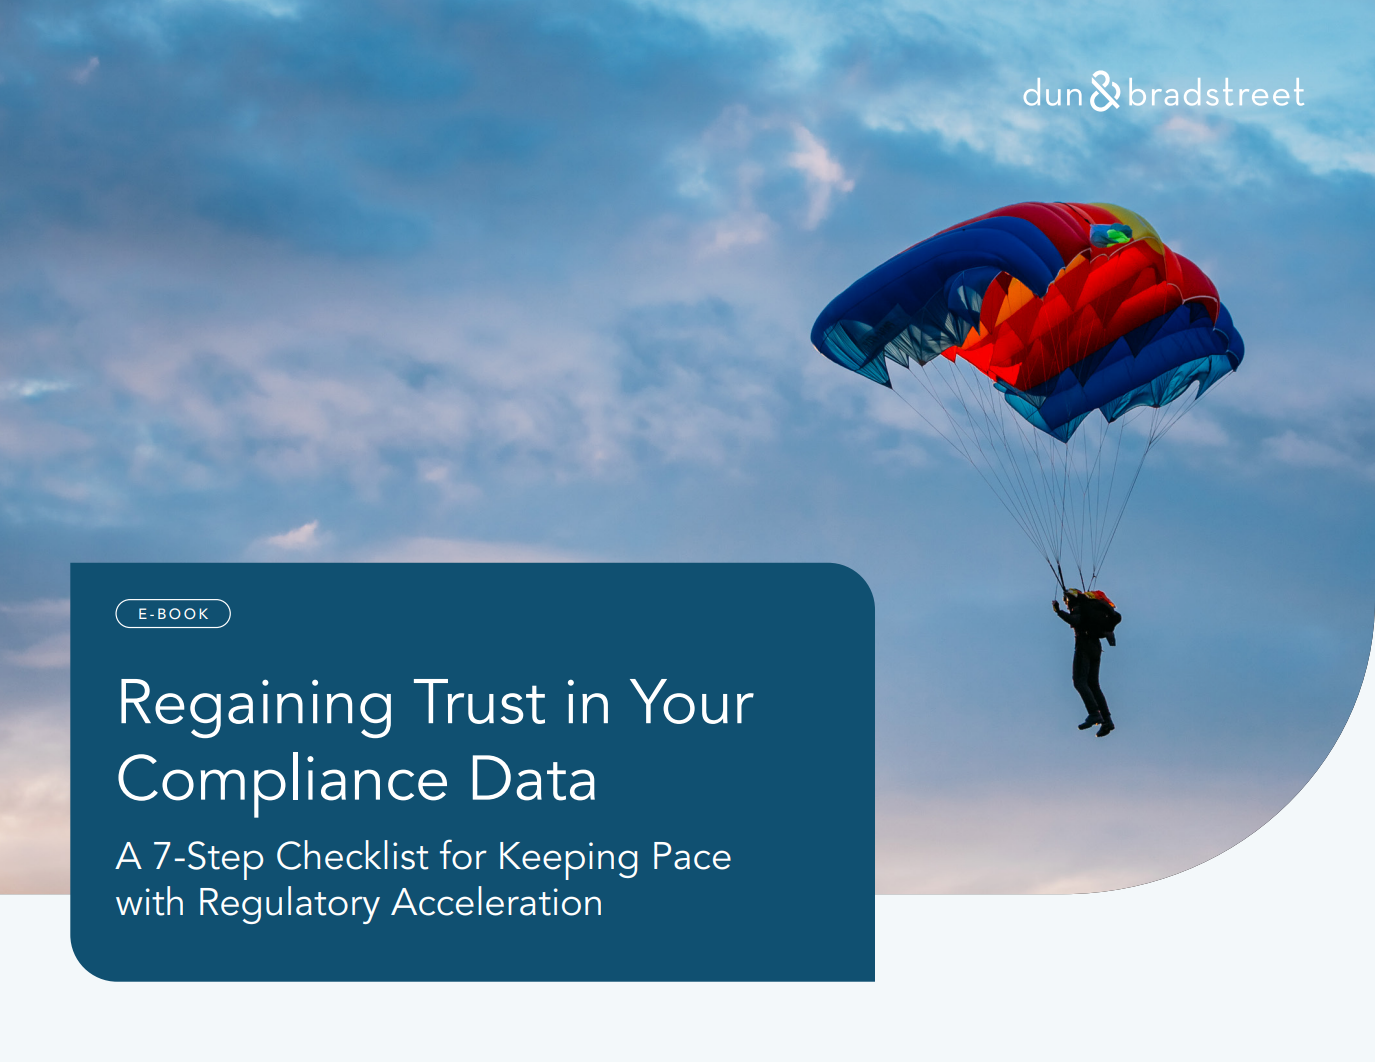 http://marketingsnow.com/wp-content/uploads/Regaining-Trust-in-your-Compliance-Data-eBook.png